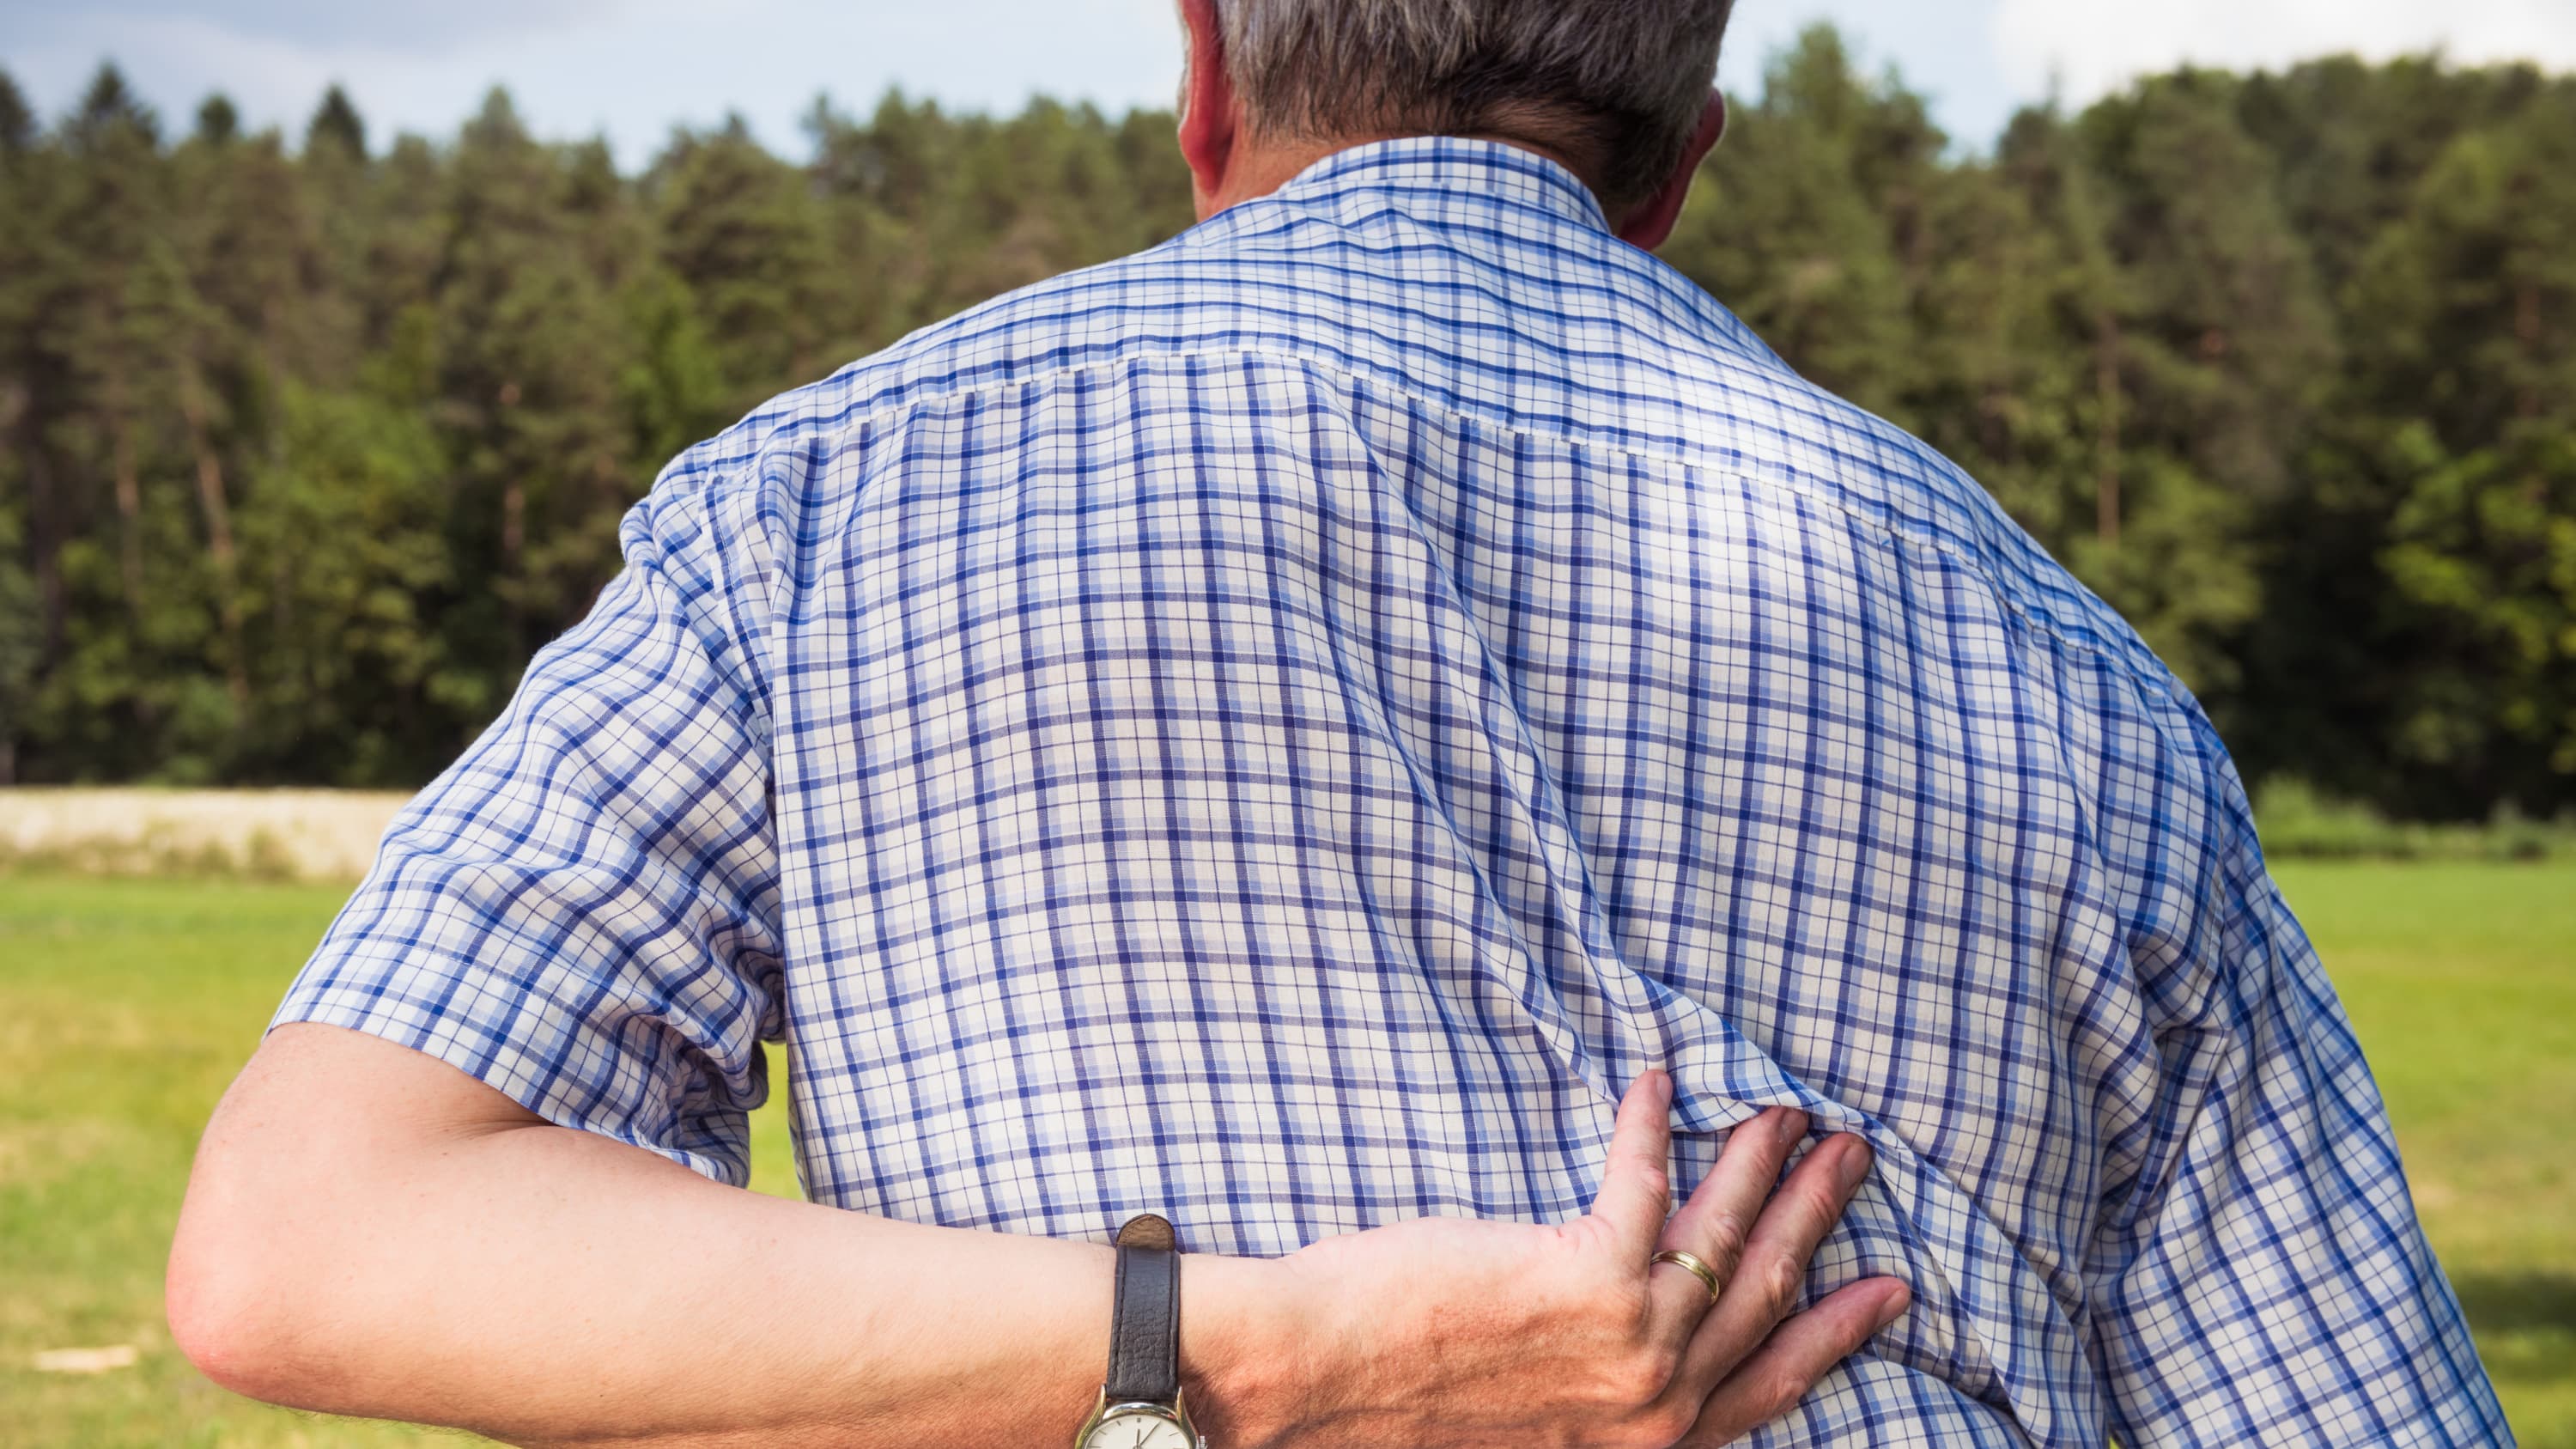 A man with a degenerative and rheumatologic spinal disorder presses his hand against his back.